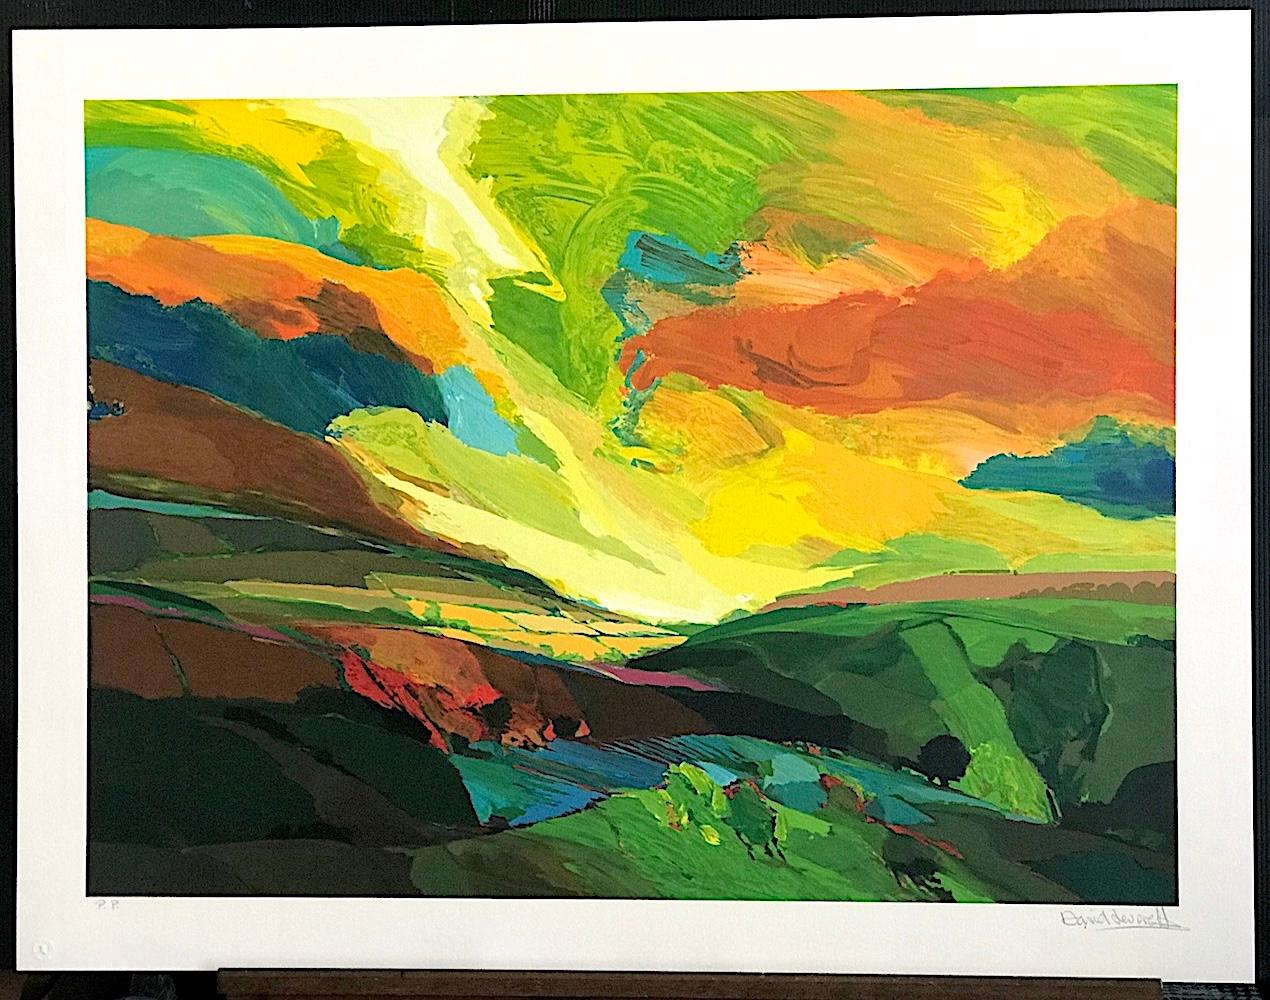 GREENFIELDS Signed Lithograph, Sacred Garden Series, Expressionist Landscape  - Contemporary Print by David Leverett